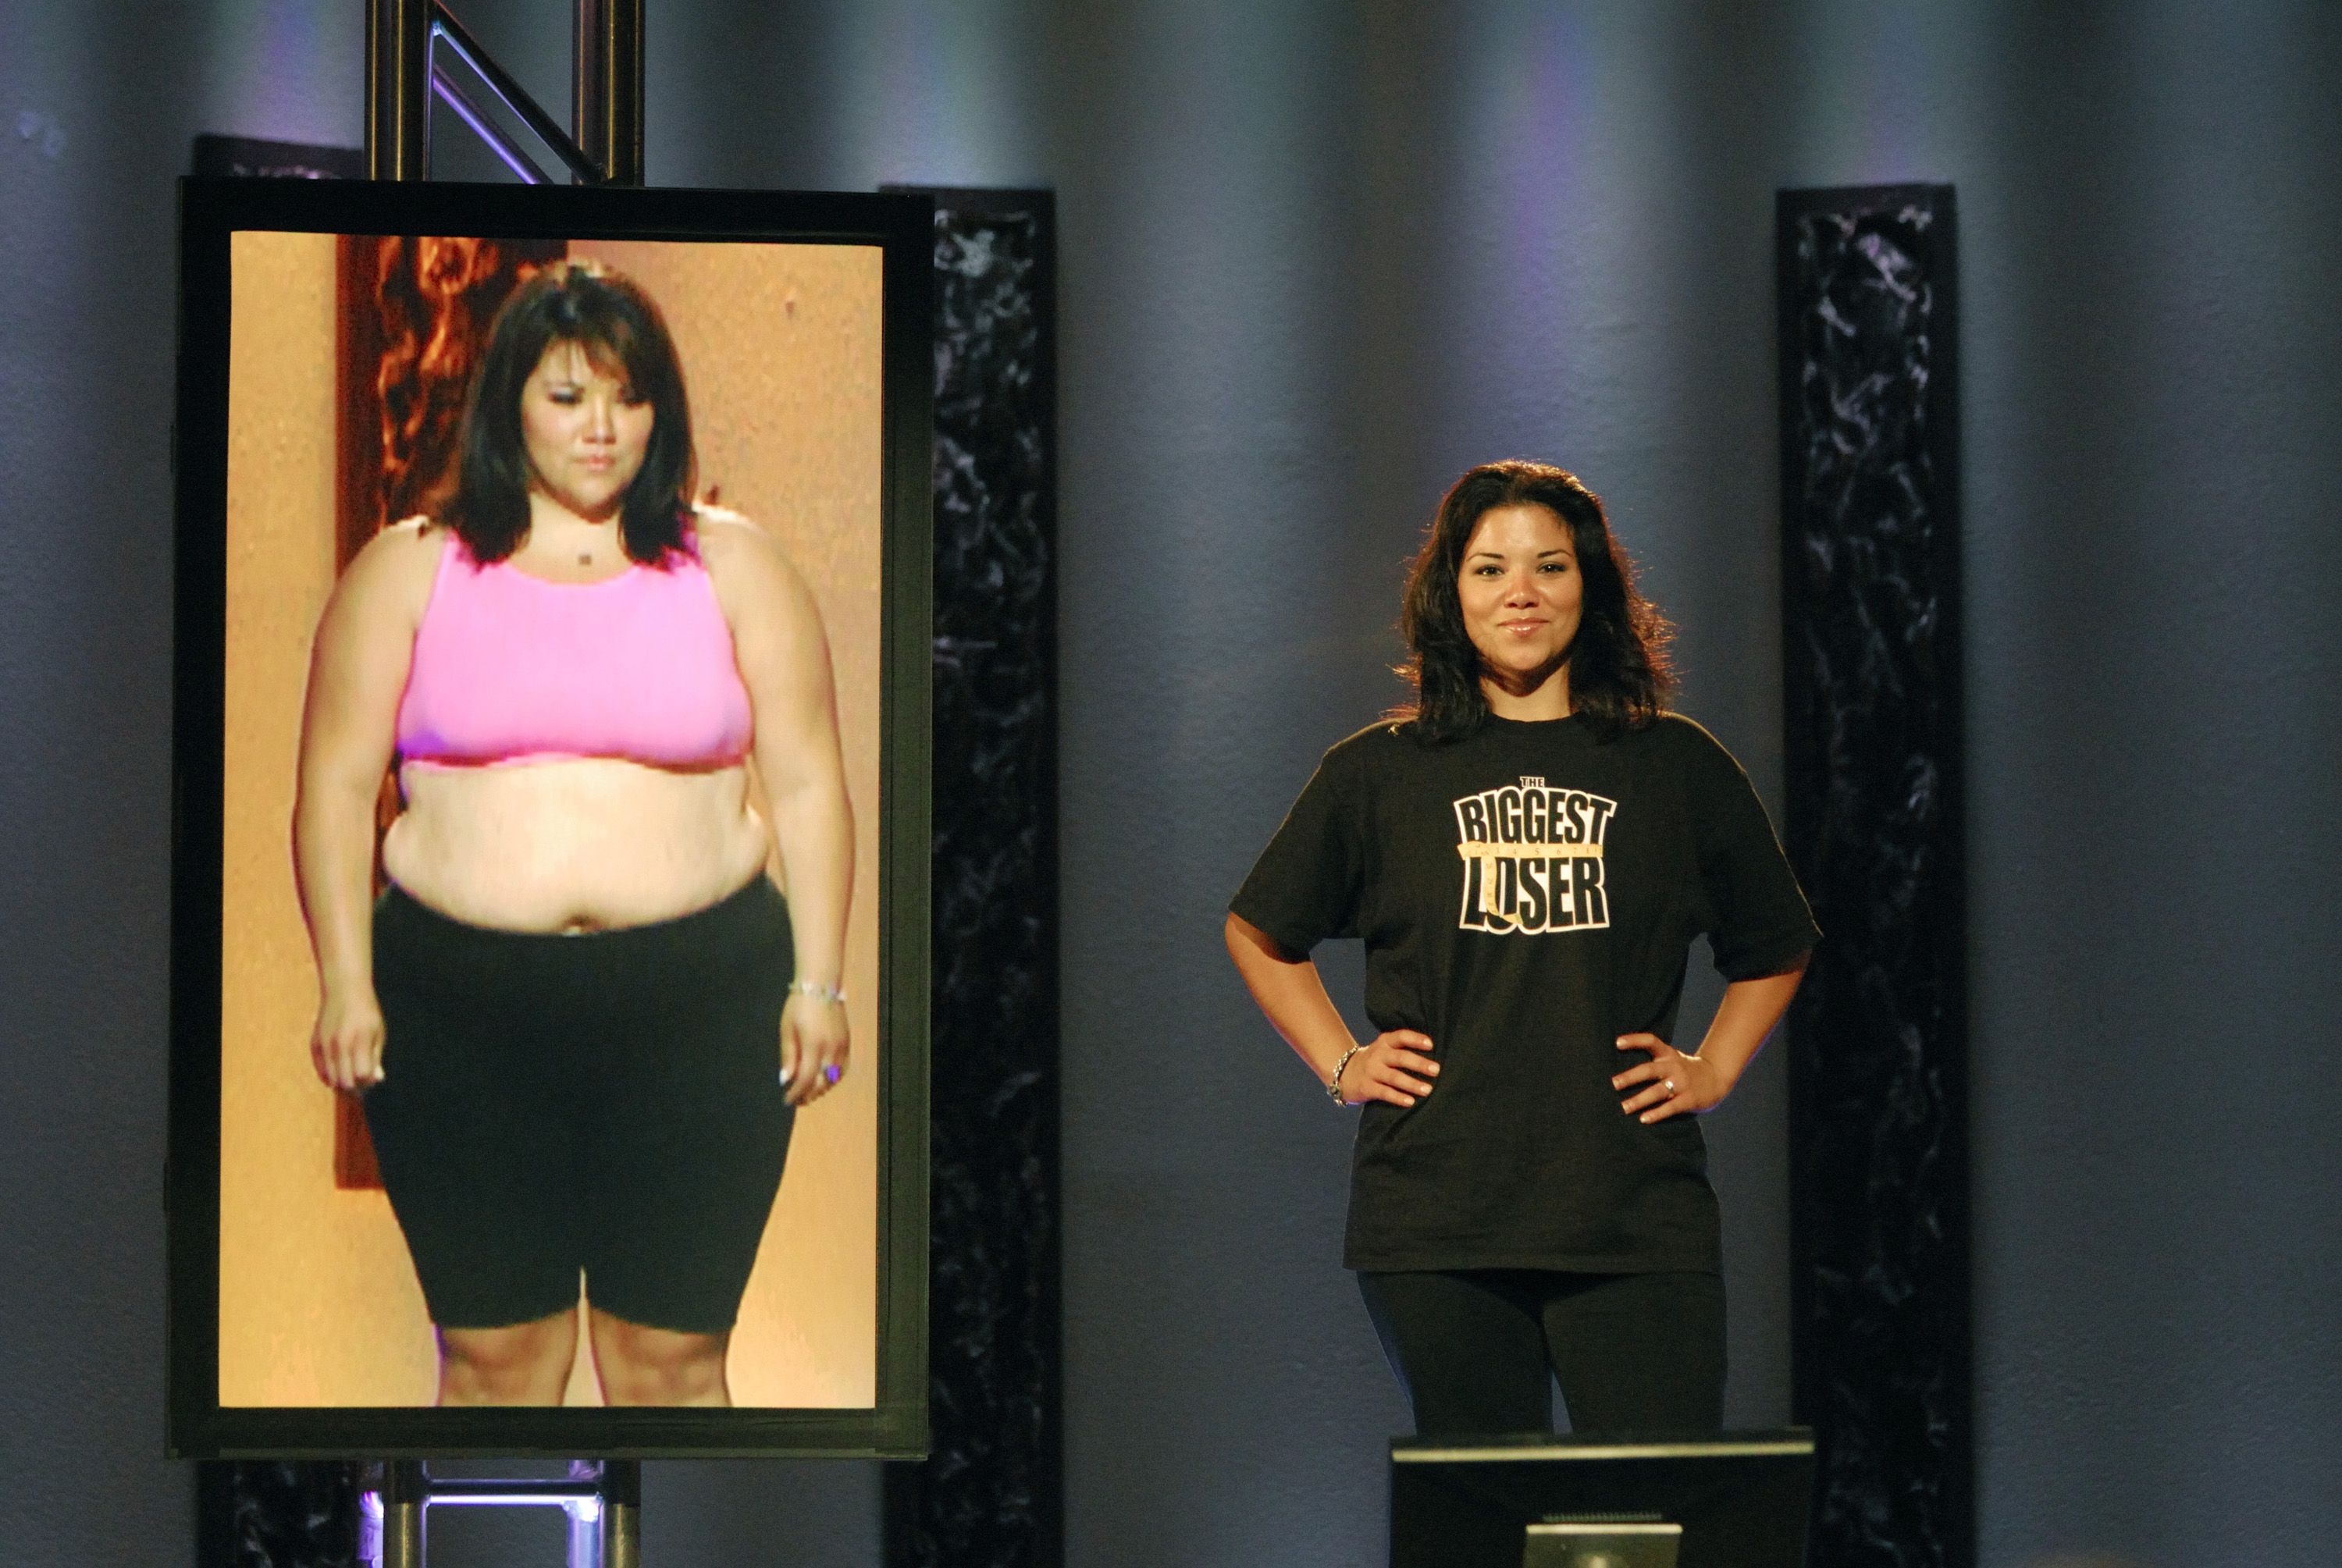 Biggest Loser' Winners Then and Now: A Look At the Champions